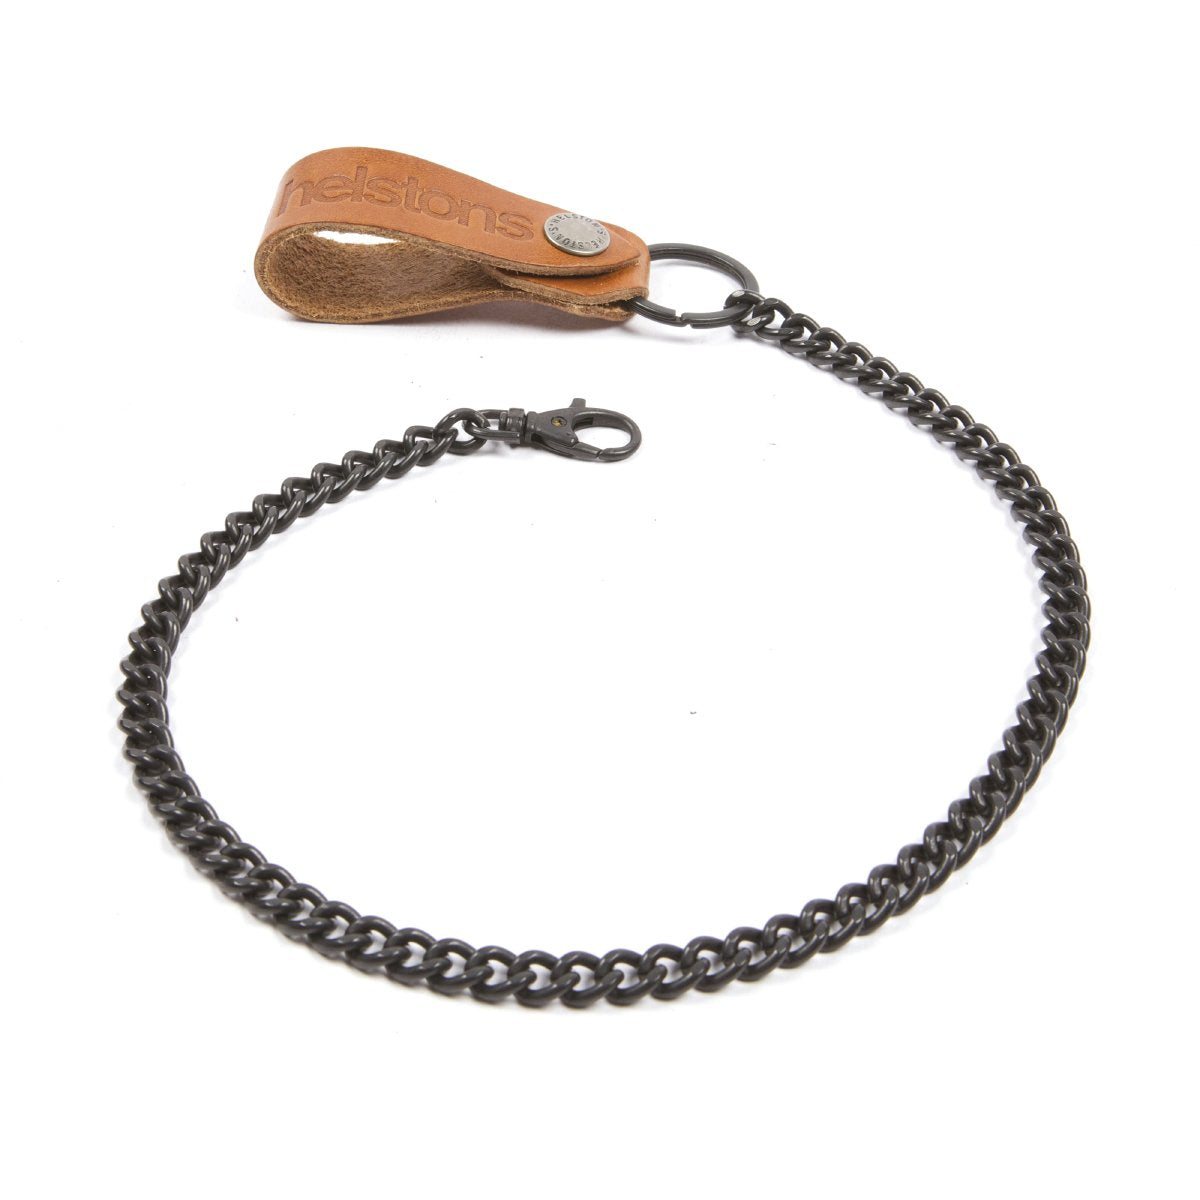 Helstons motorcycle chain with smooth leather buckle - Tan